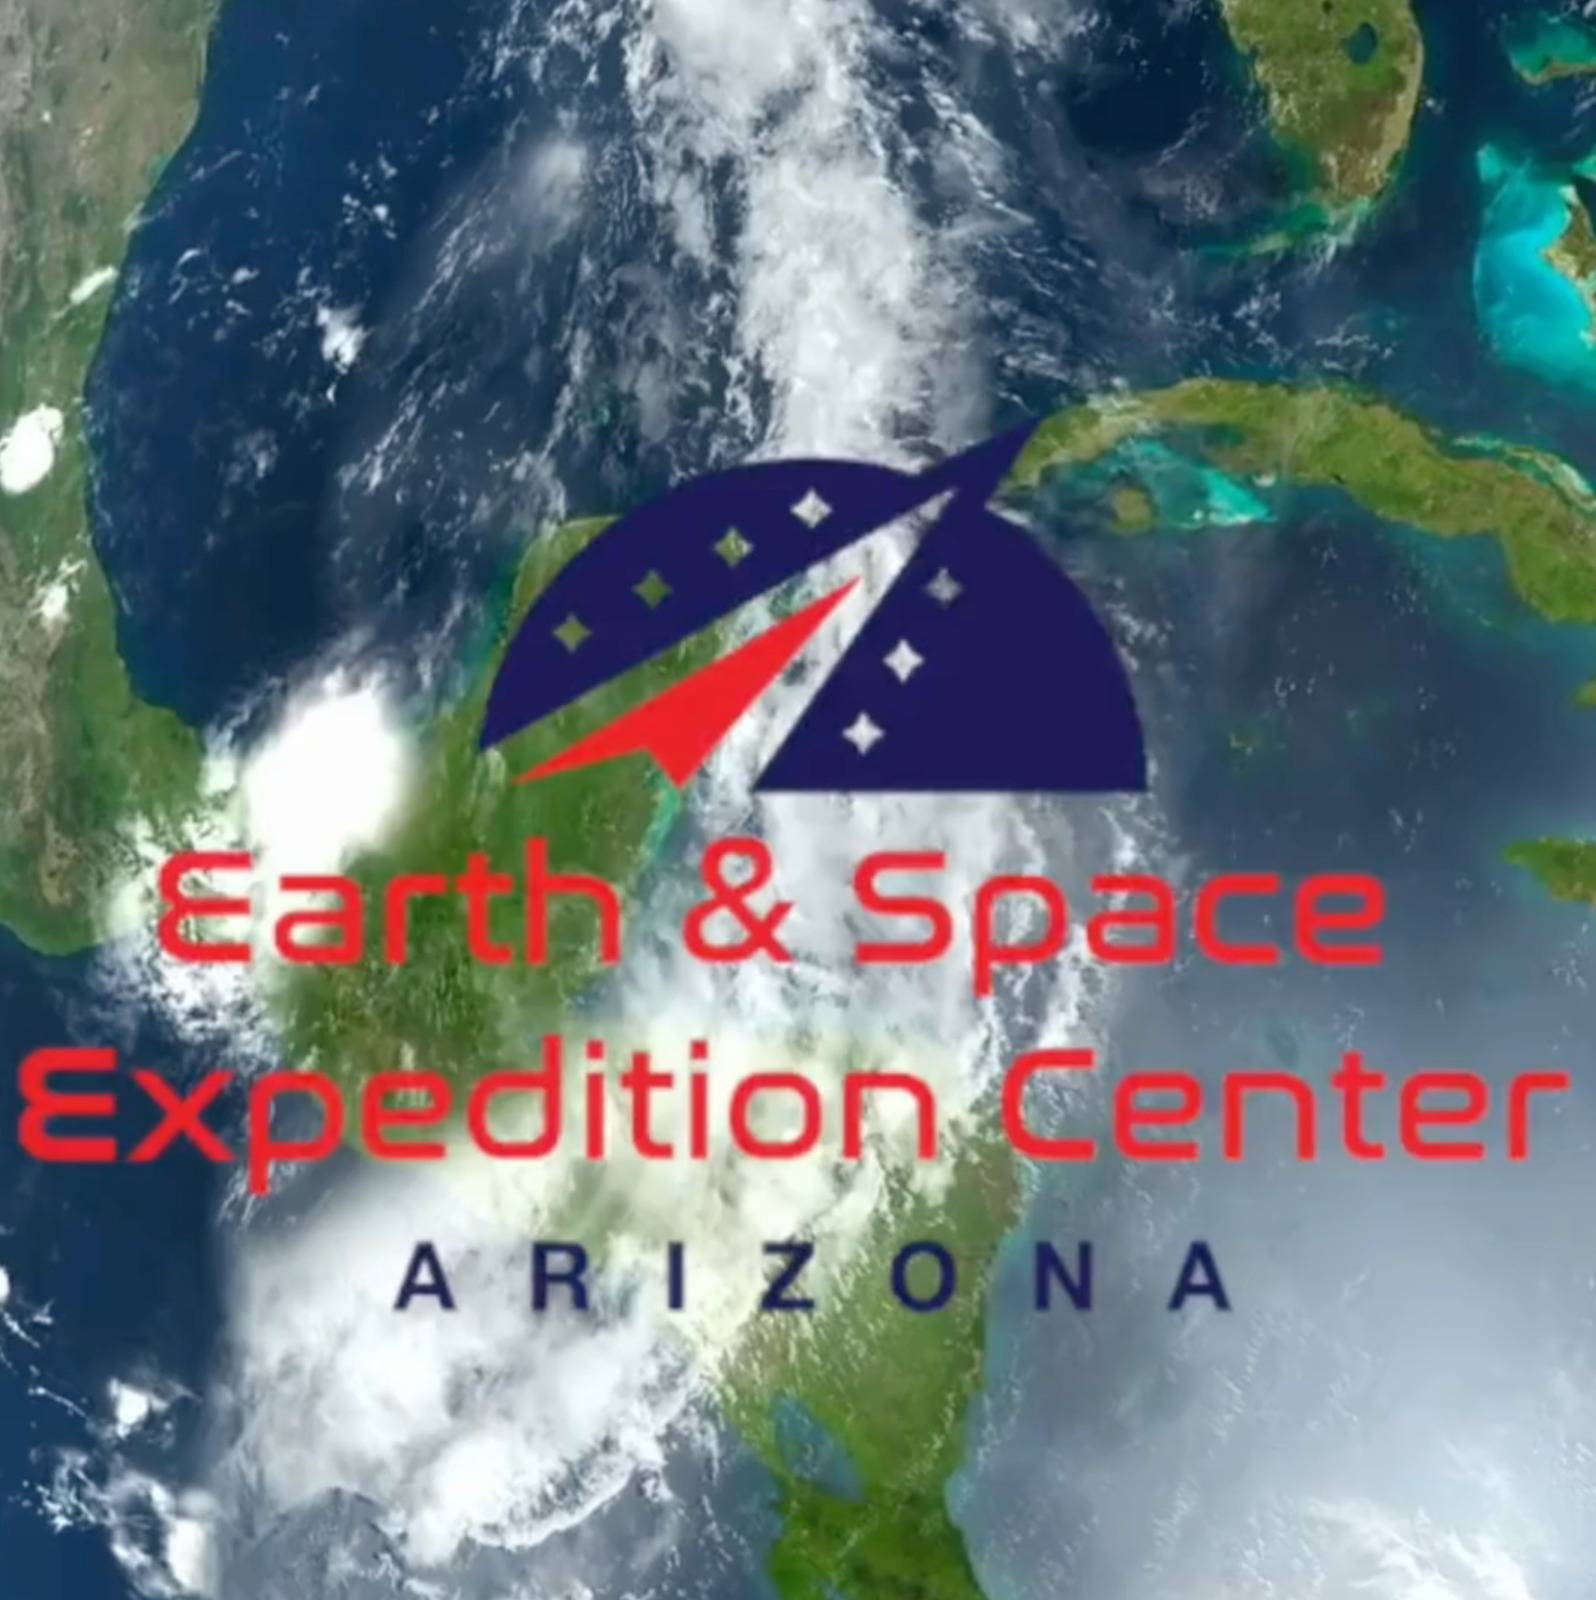 Earth and space expedition center